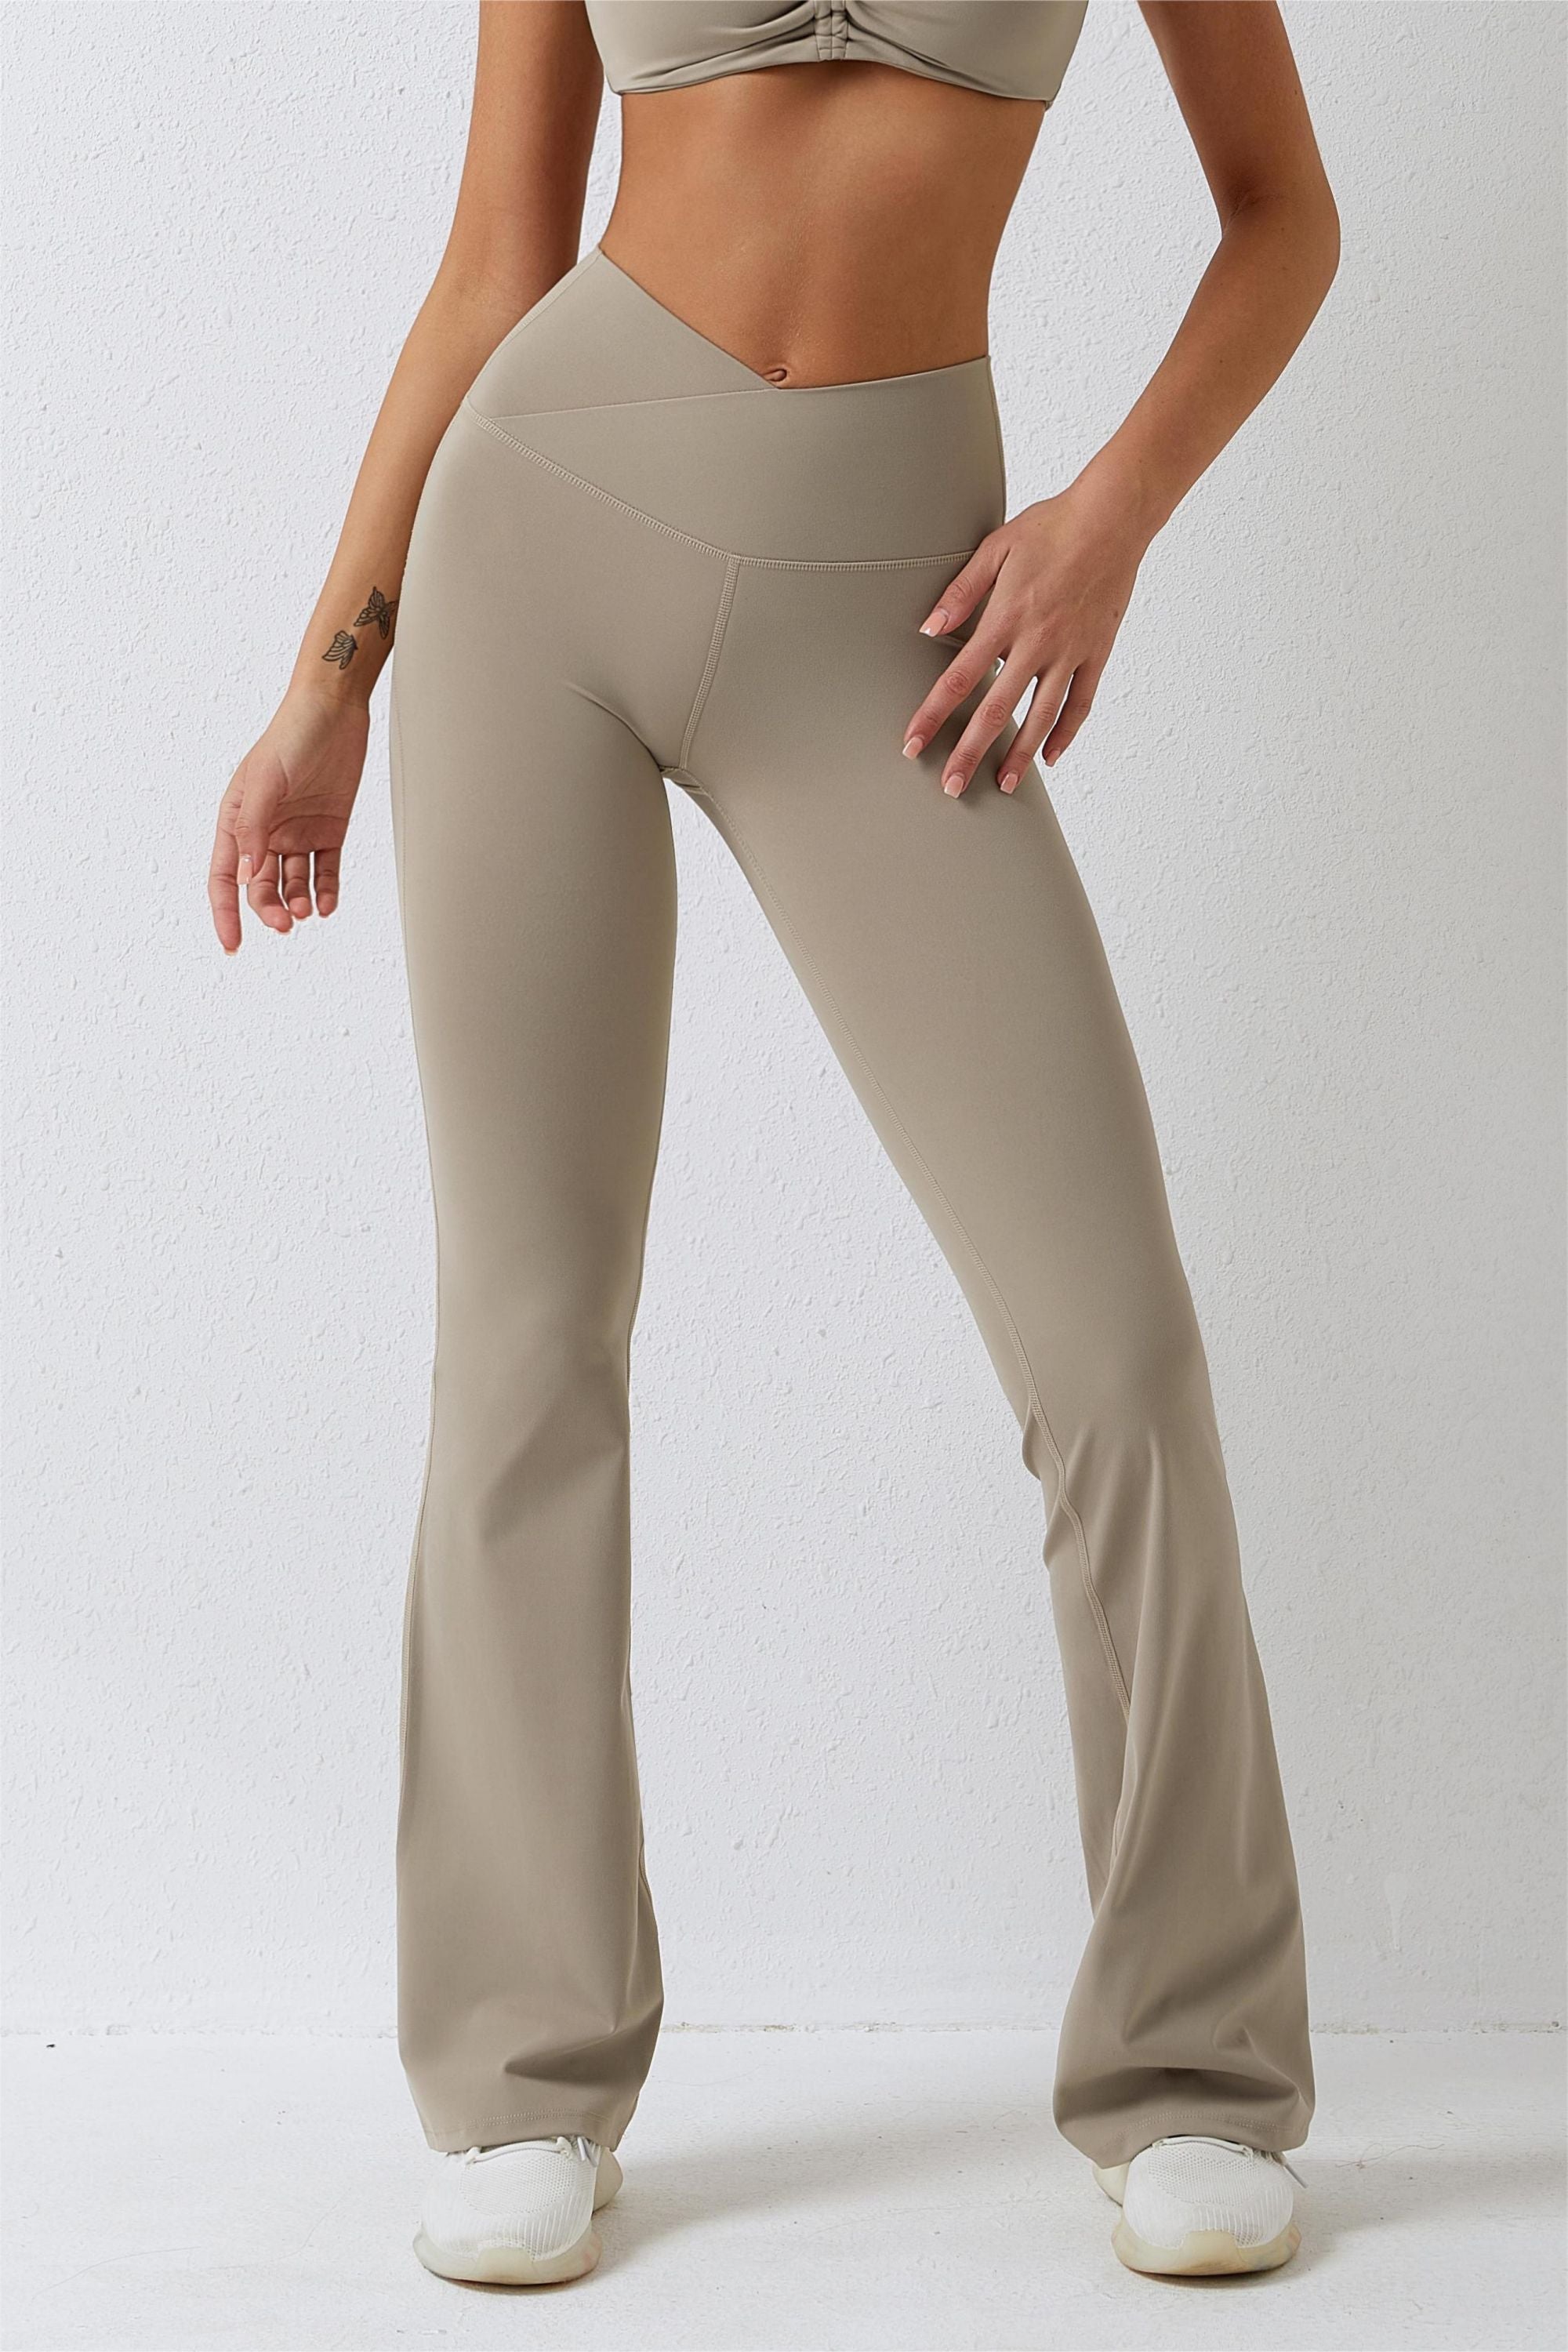 High-Waisted Crossover Flare Leggings For Women – Zioccie